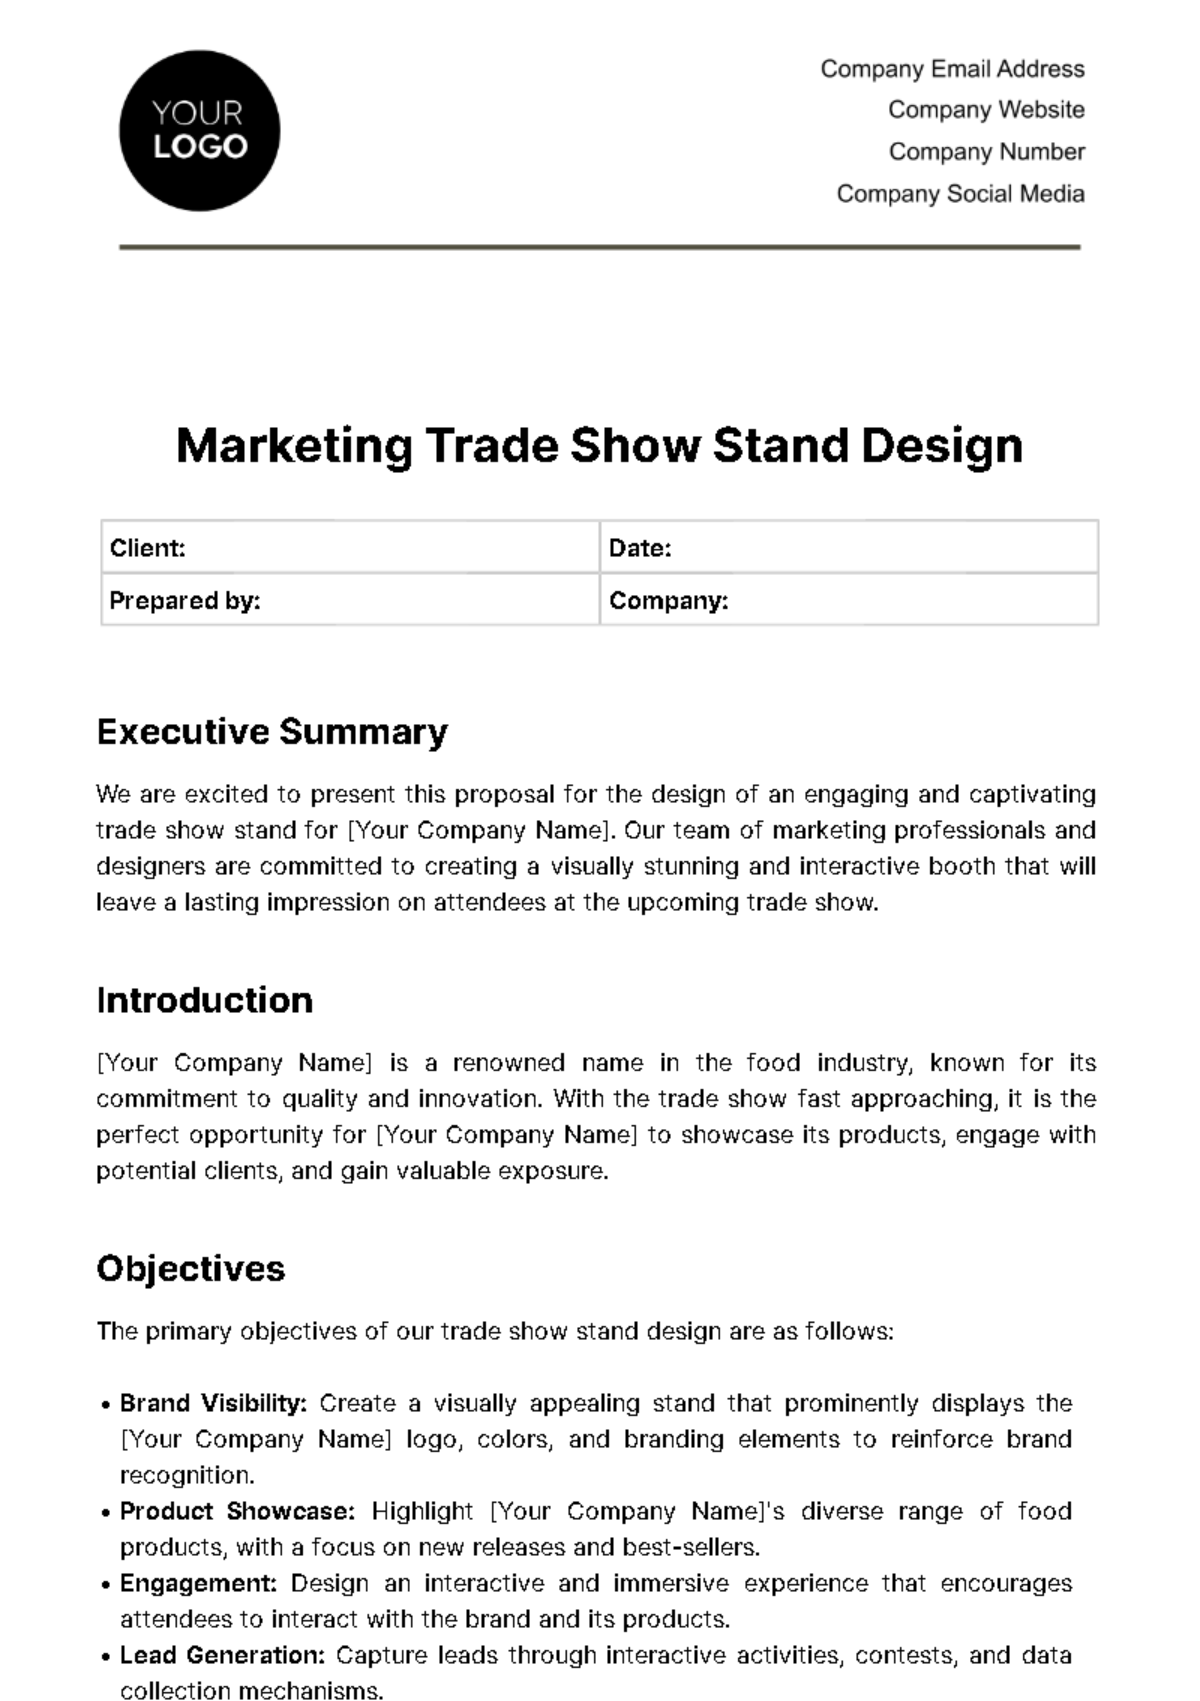 Free Marketing Trade Show Stand Design Proposal Template